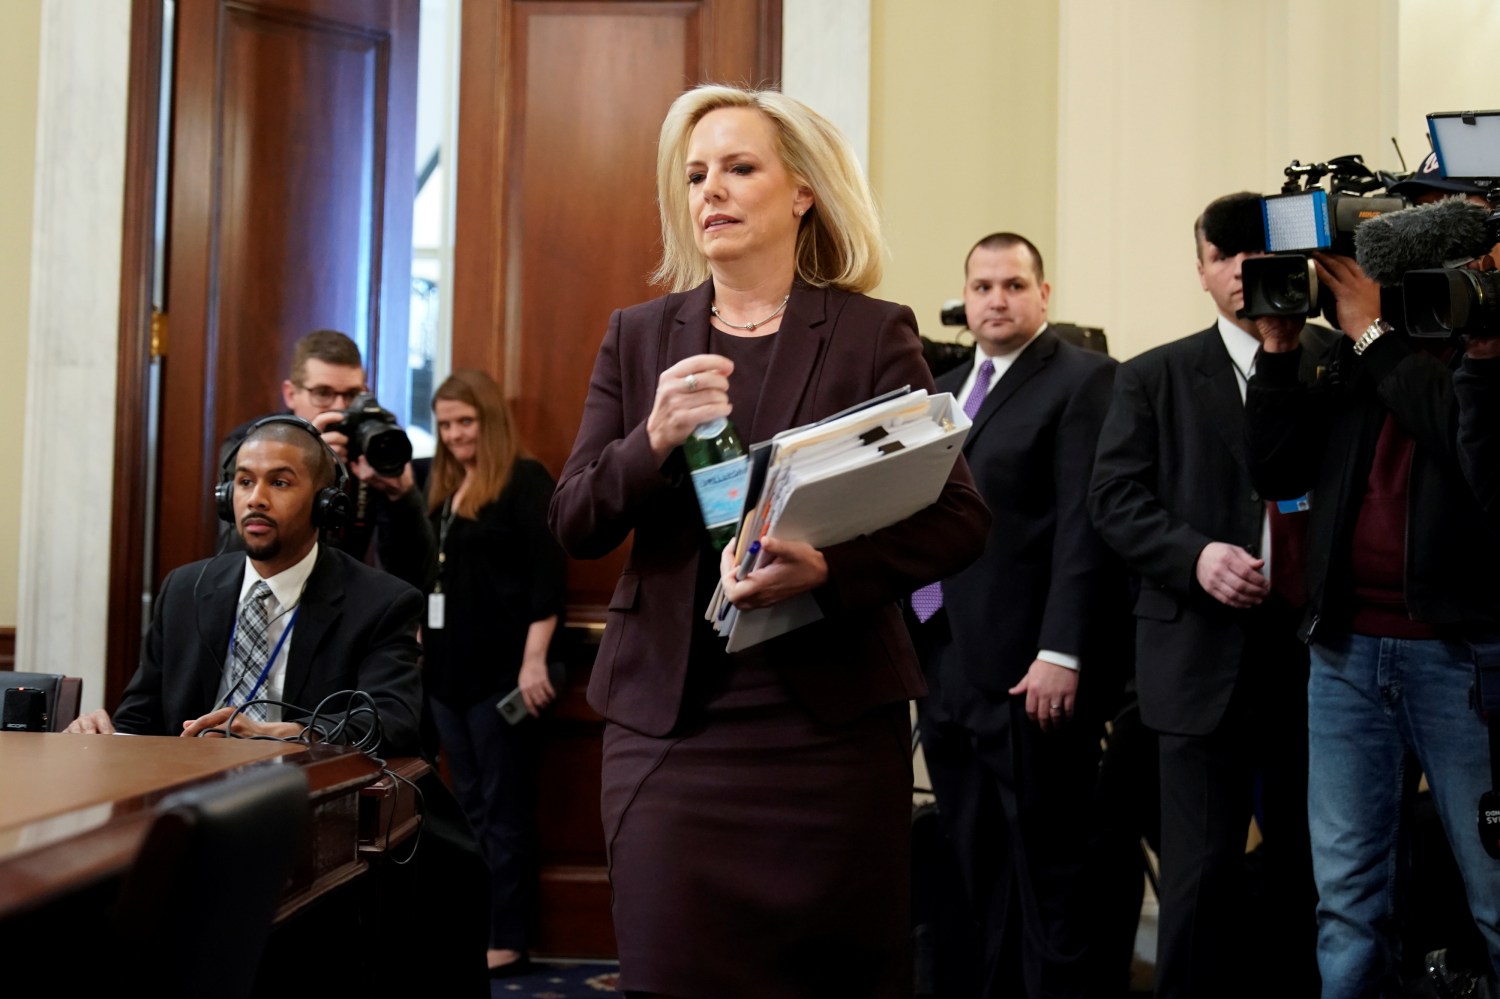 Department of Homeland Security Secretary Kirstjen Nielsen arrives to testify before a House Homeland Security Committee hearing on  The Way Forward on Border Security on Capitol Hill in Washington, U.S., March 6, 2019. REUTERS/Joshua Roberts? - RC15A65A0730